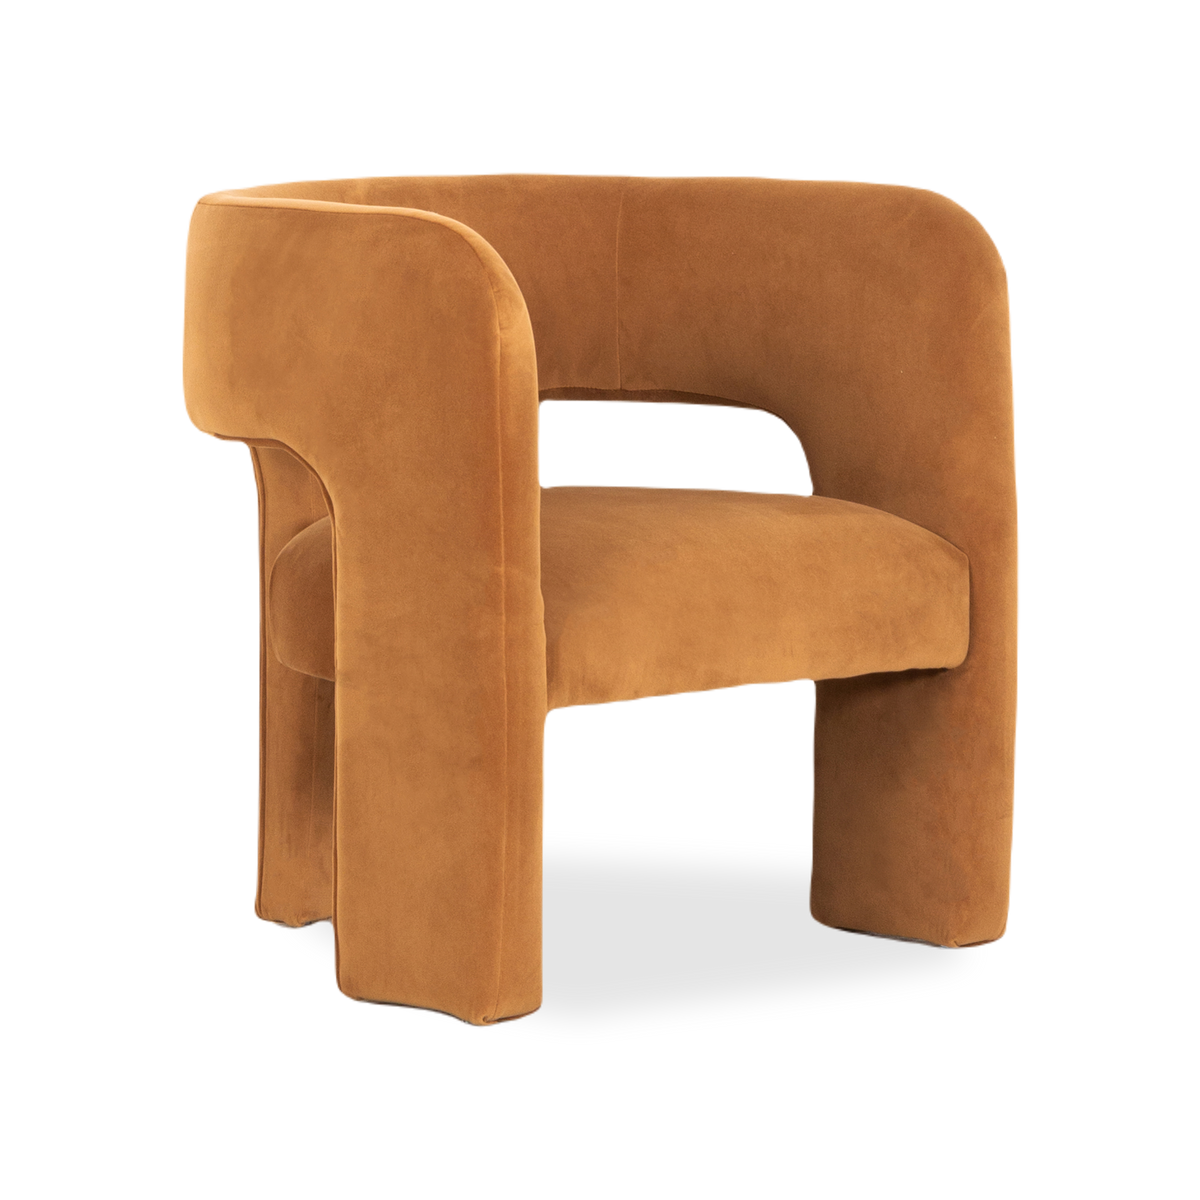 With its sculptural form, the Maine Lounge Chair is a modern style with a vintage feel.